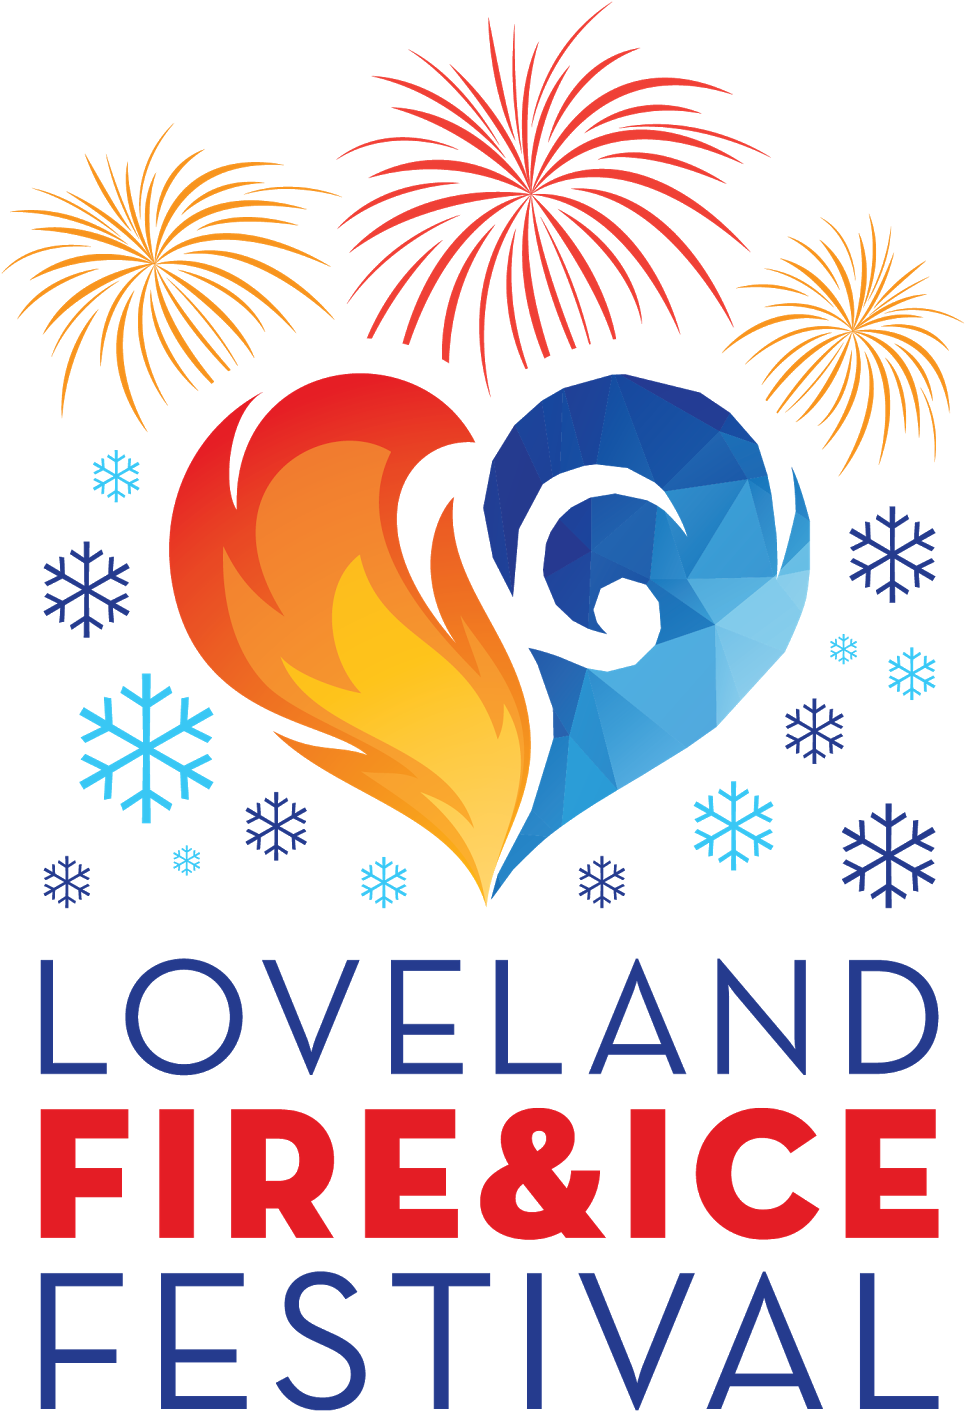 Loveland Fire And Ice Festival - Graphic Design (1154x1600)